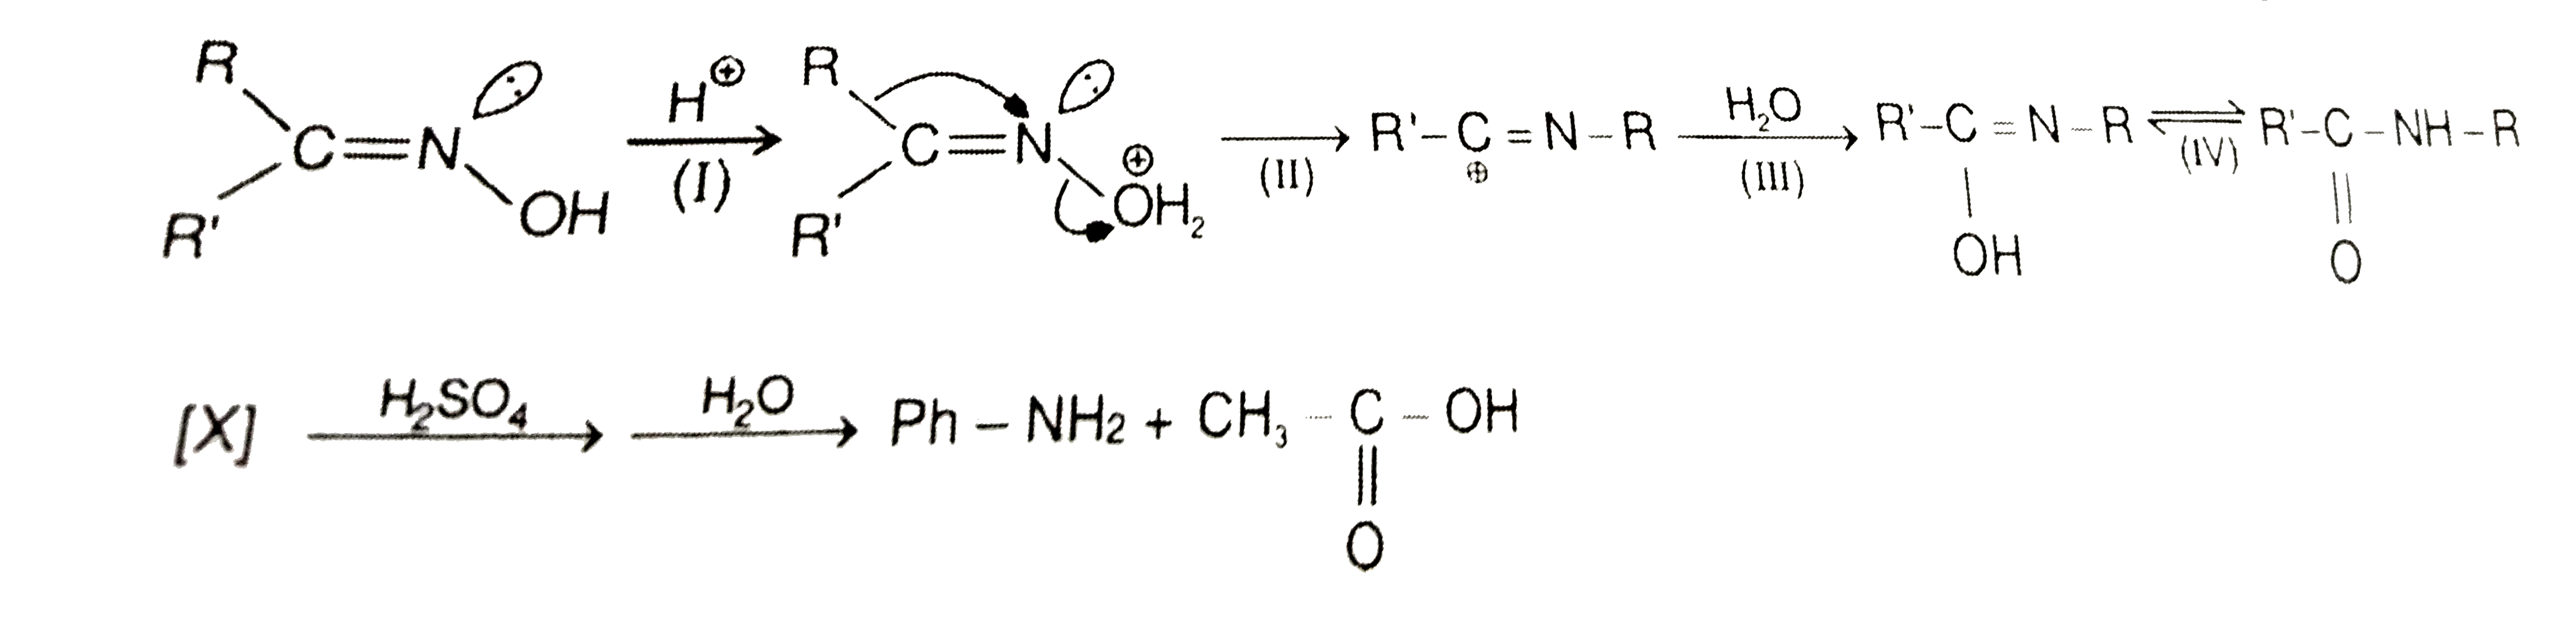 Aldehydes and Ketones react with NH(2)OH to form aldoximes and Ketoximes respectively. Configuration of these can be determined by Beckmann rearragement as that group migrates which is anti w.r.t -OH      Which step is Rate determening step ?